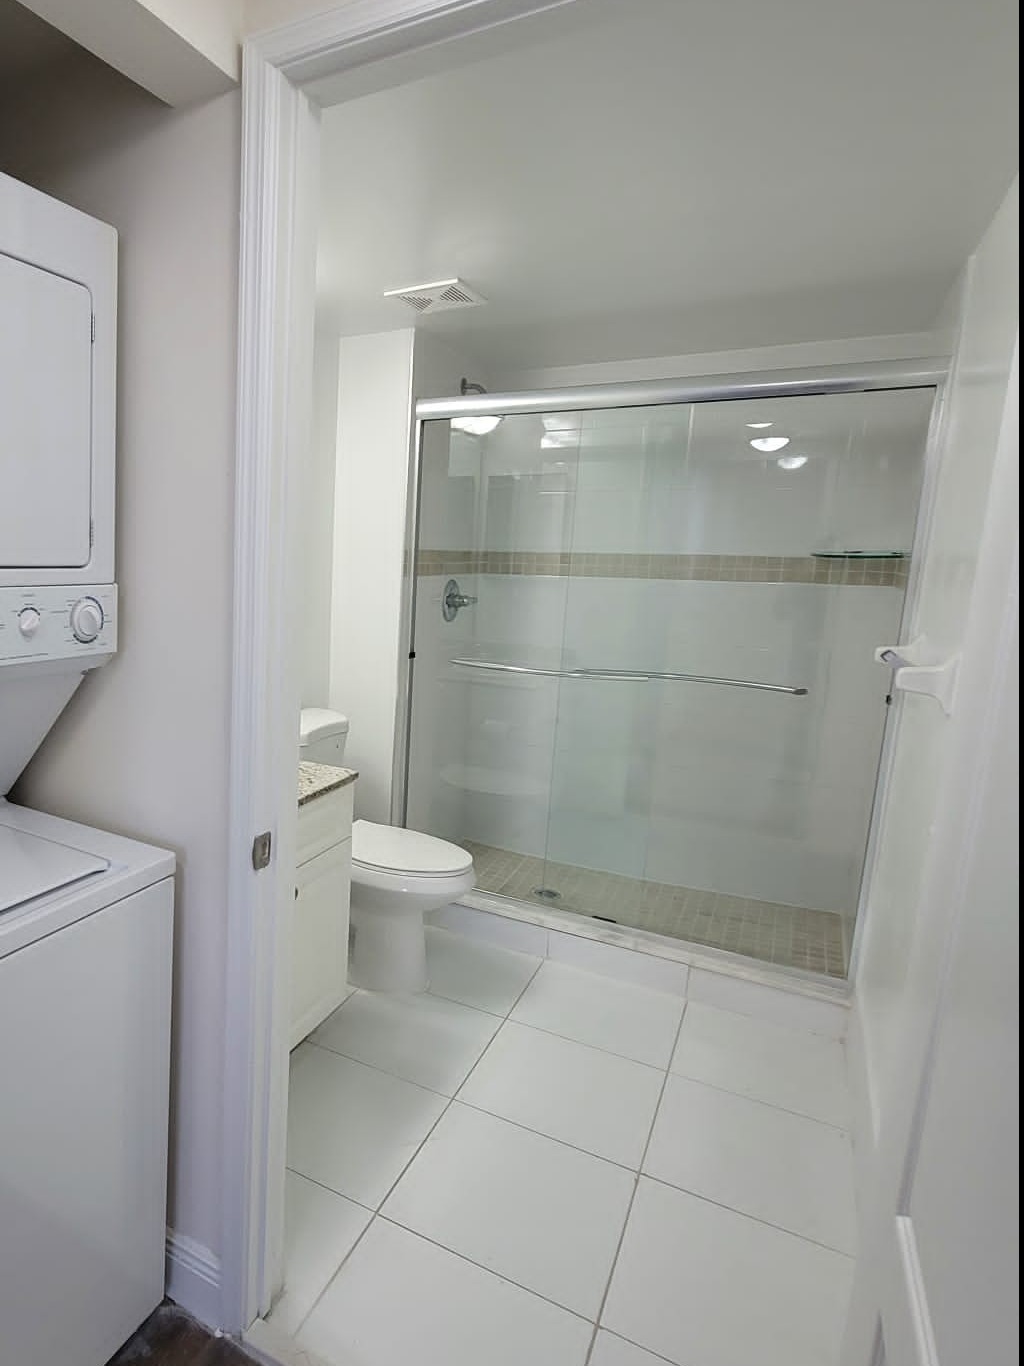 Newly Remodeled Bathrooms With Glass Shower Enclosures*